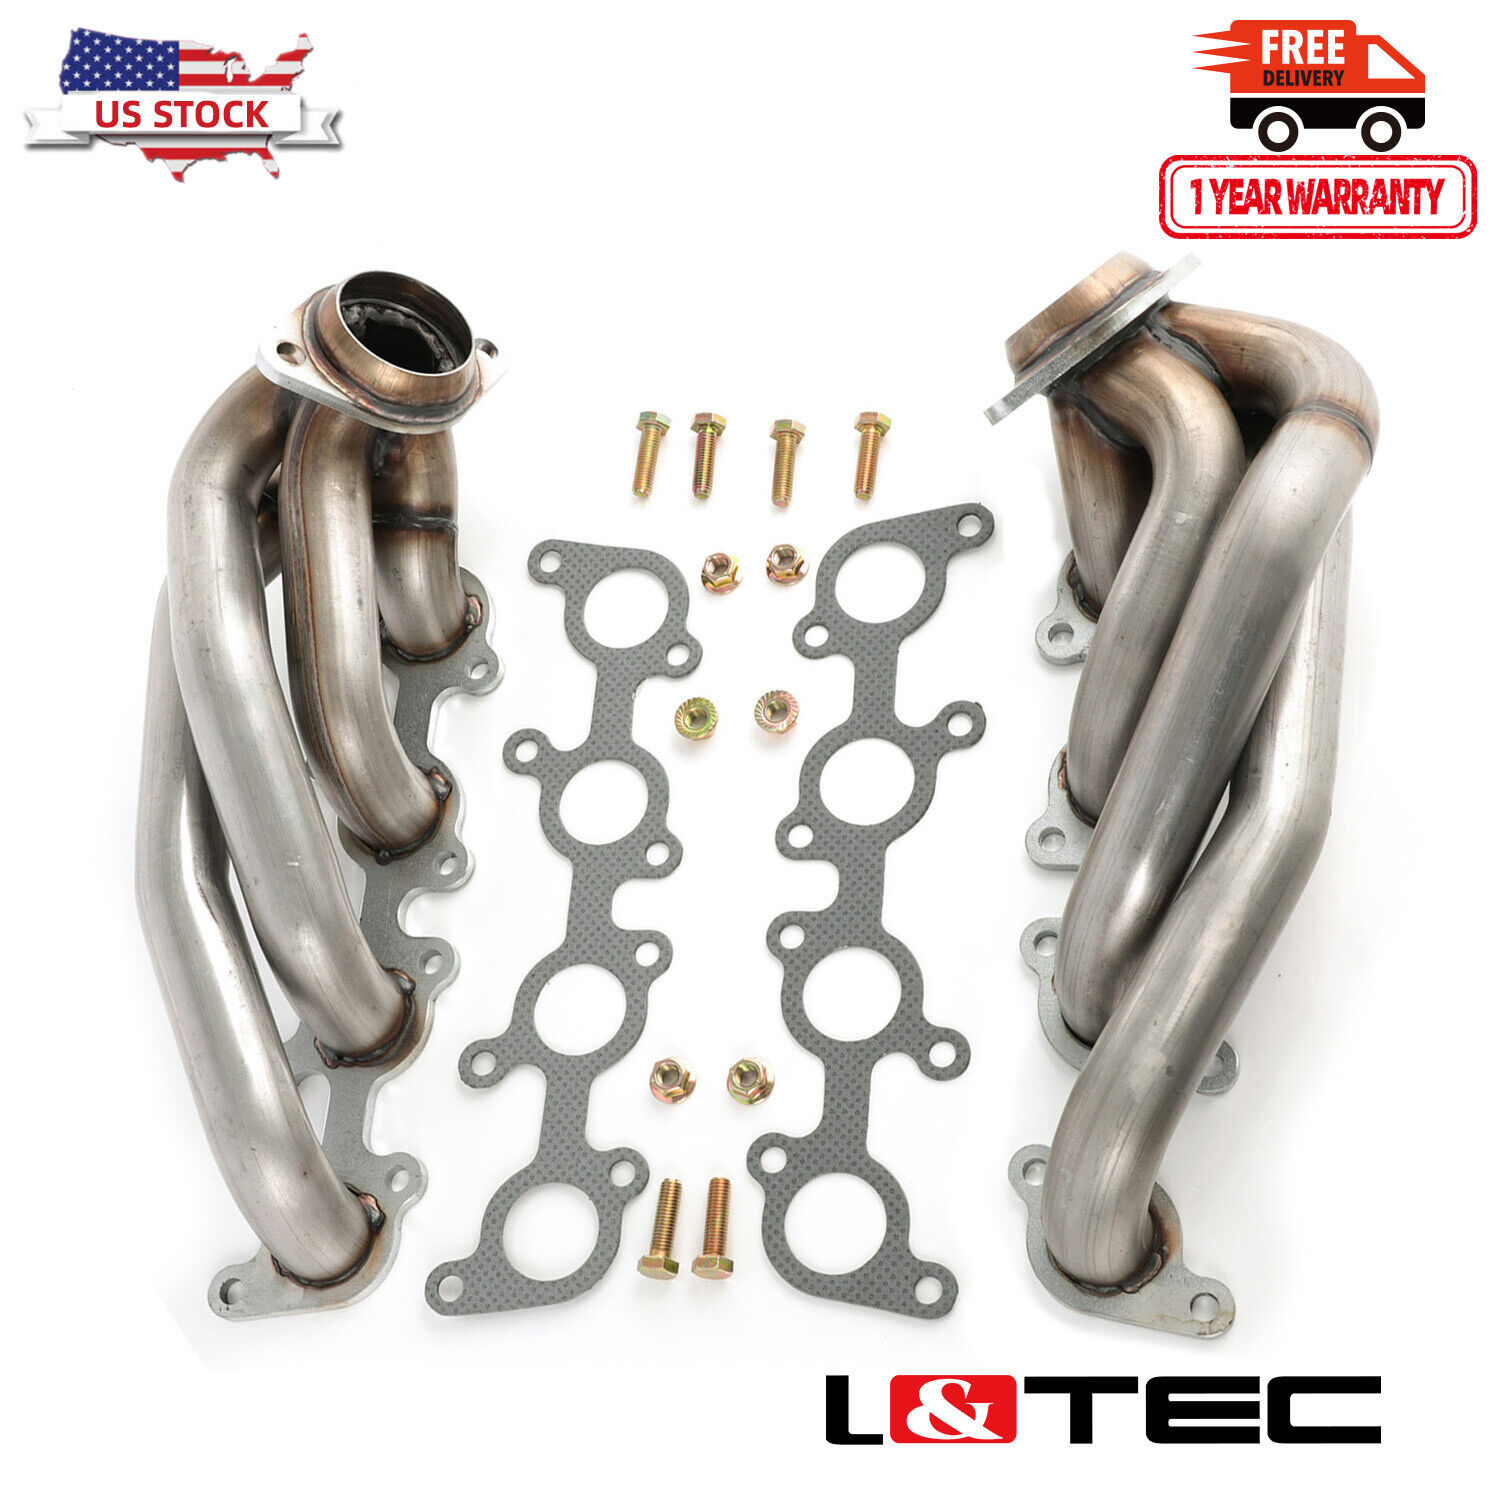 L&TEC Shorty Headers for Ford F-150 11-14 5.0L V8 1-5/8